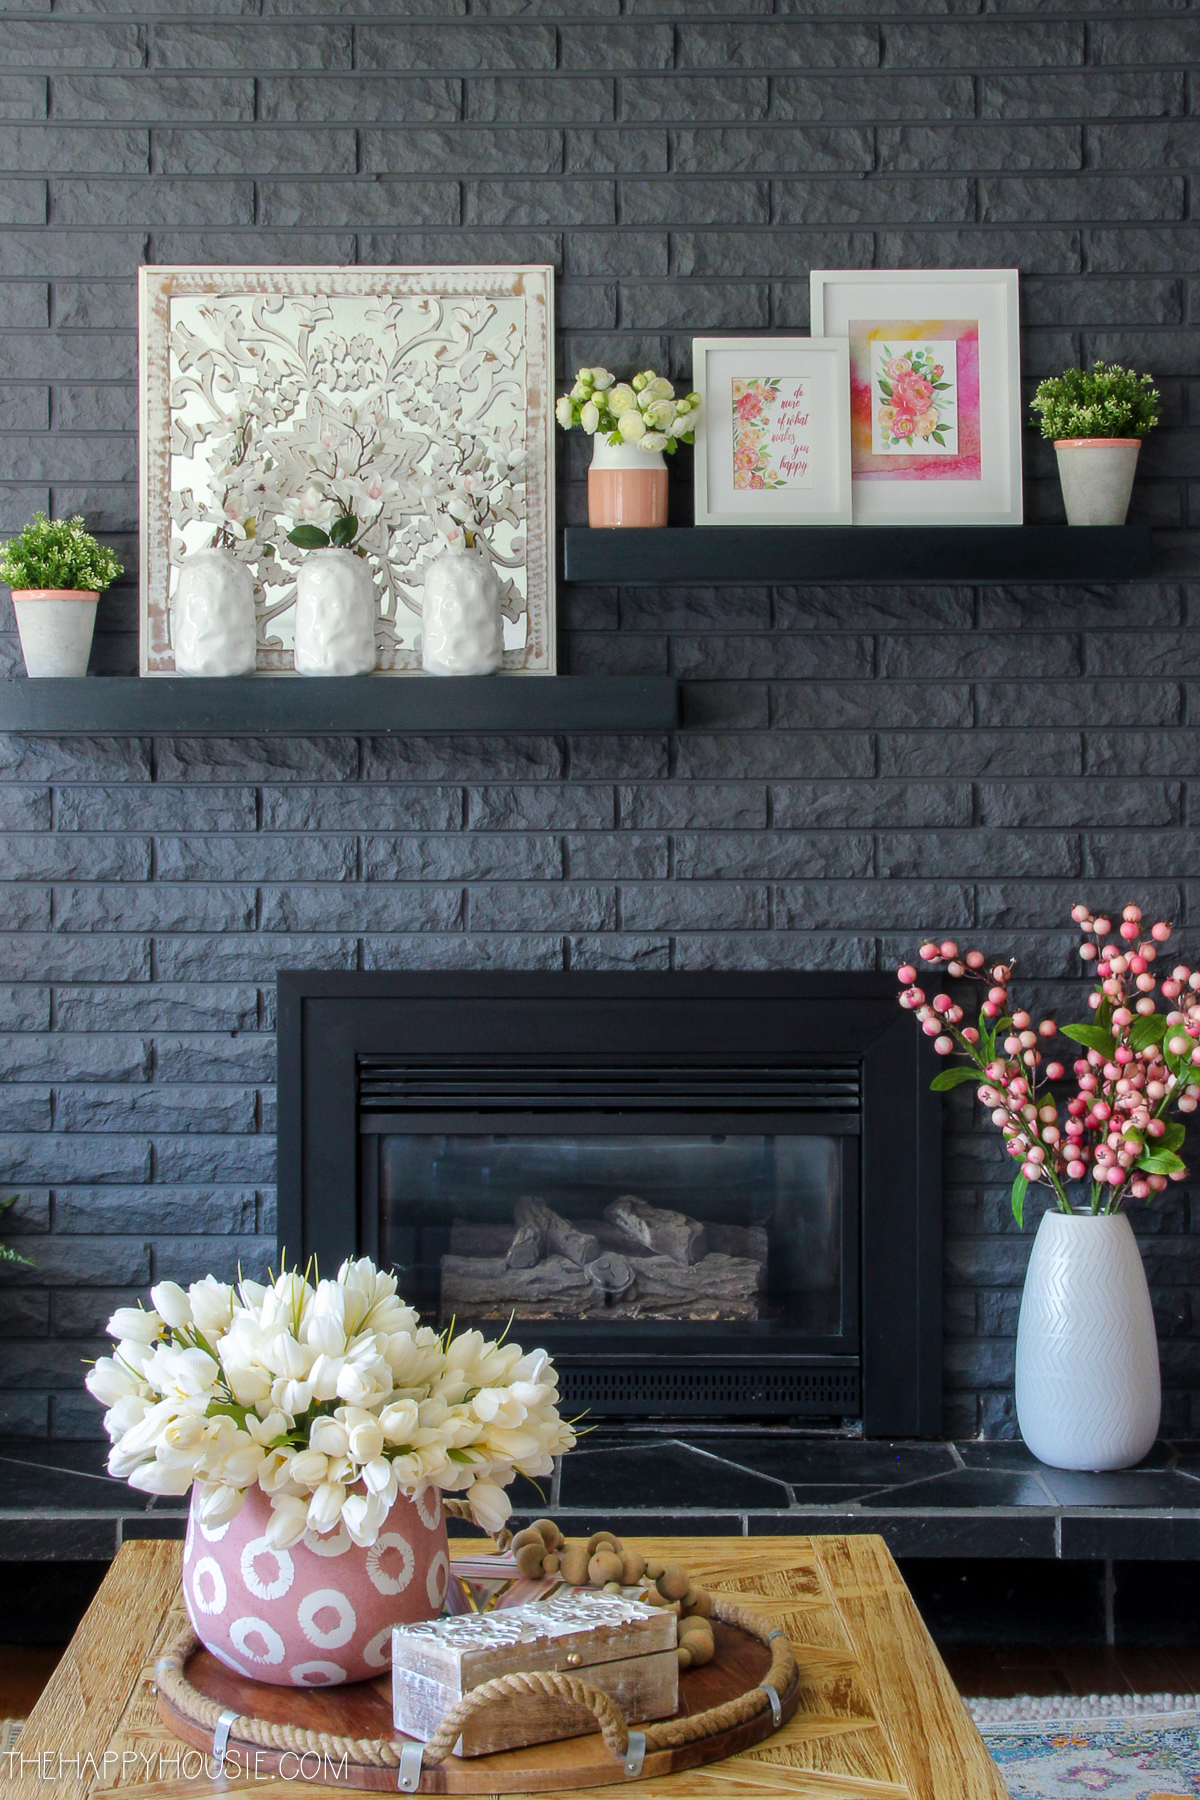 White vases filled with flowers ad shelves above the fireplace.